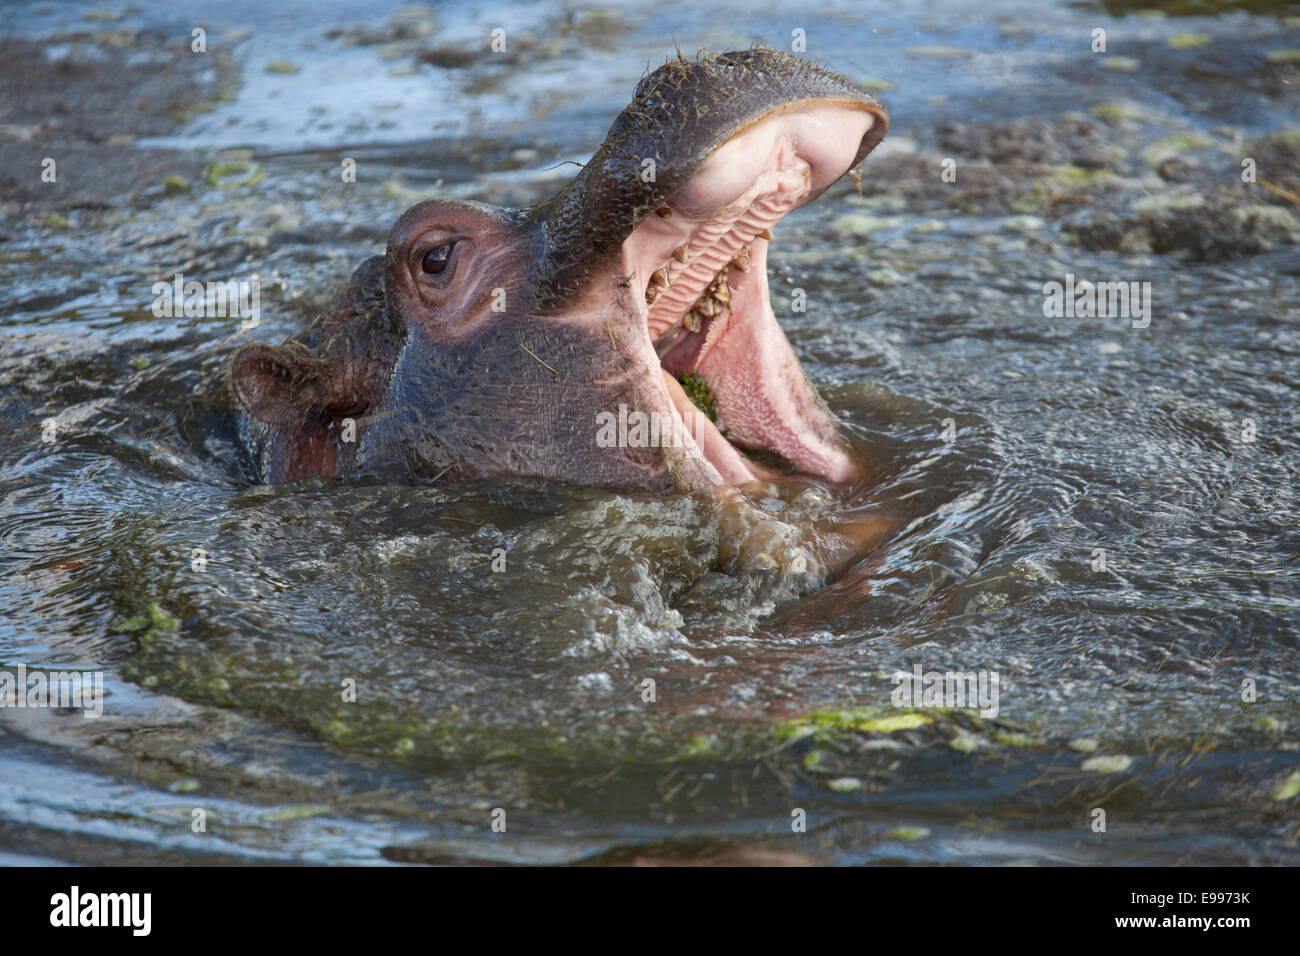 A young Common Hippopotamus calf opening its mouth in the water Stock Photo